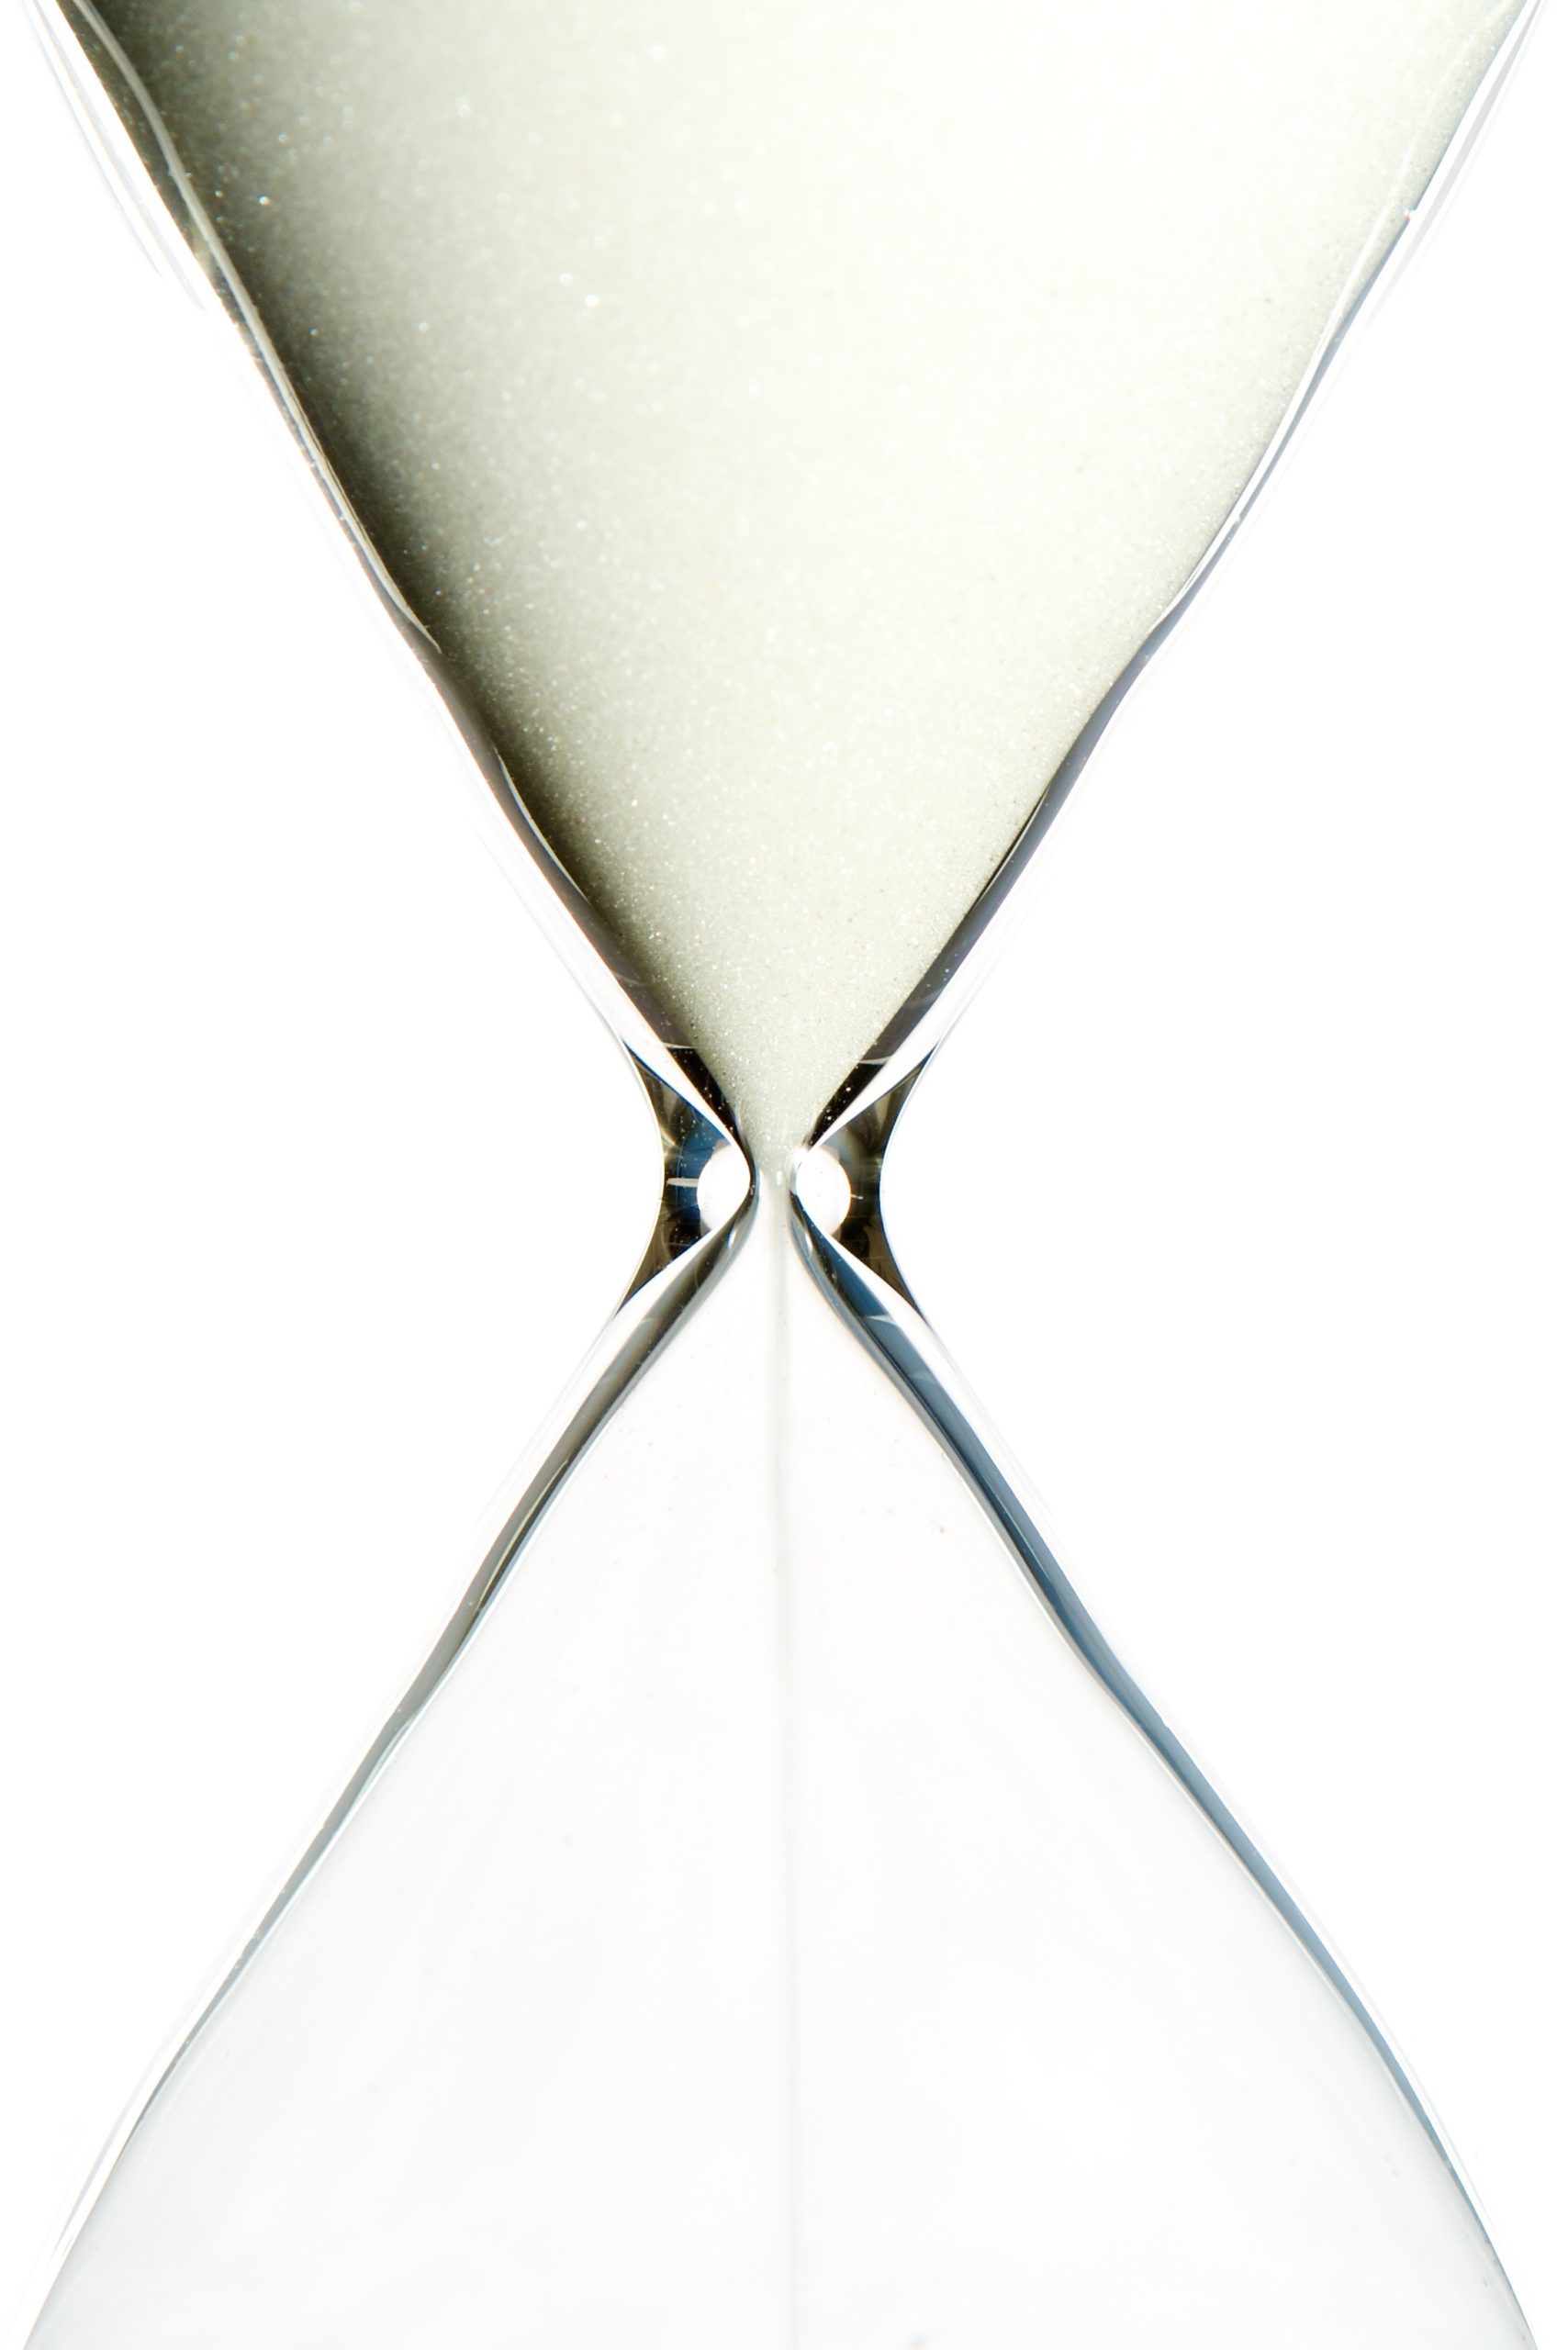 a large hourglass sand timer